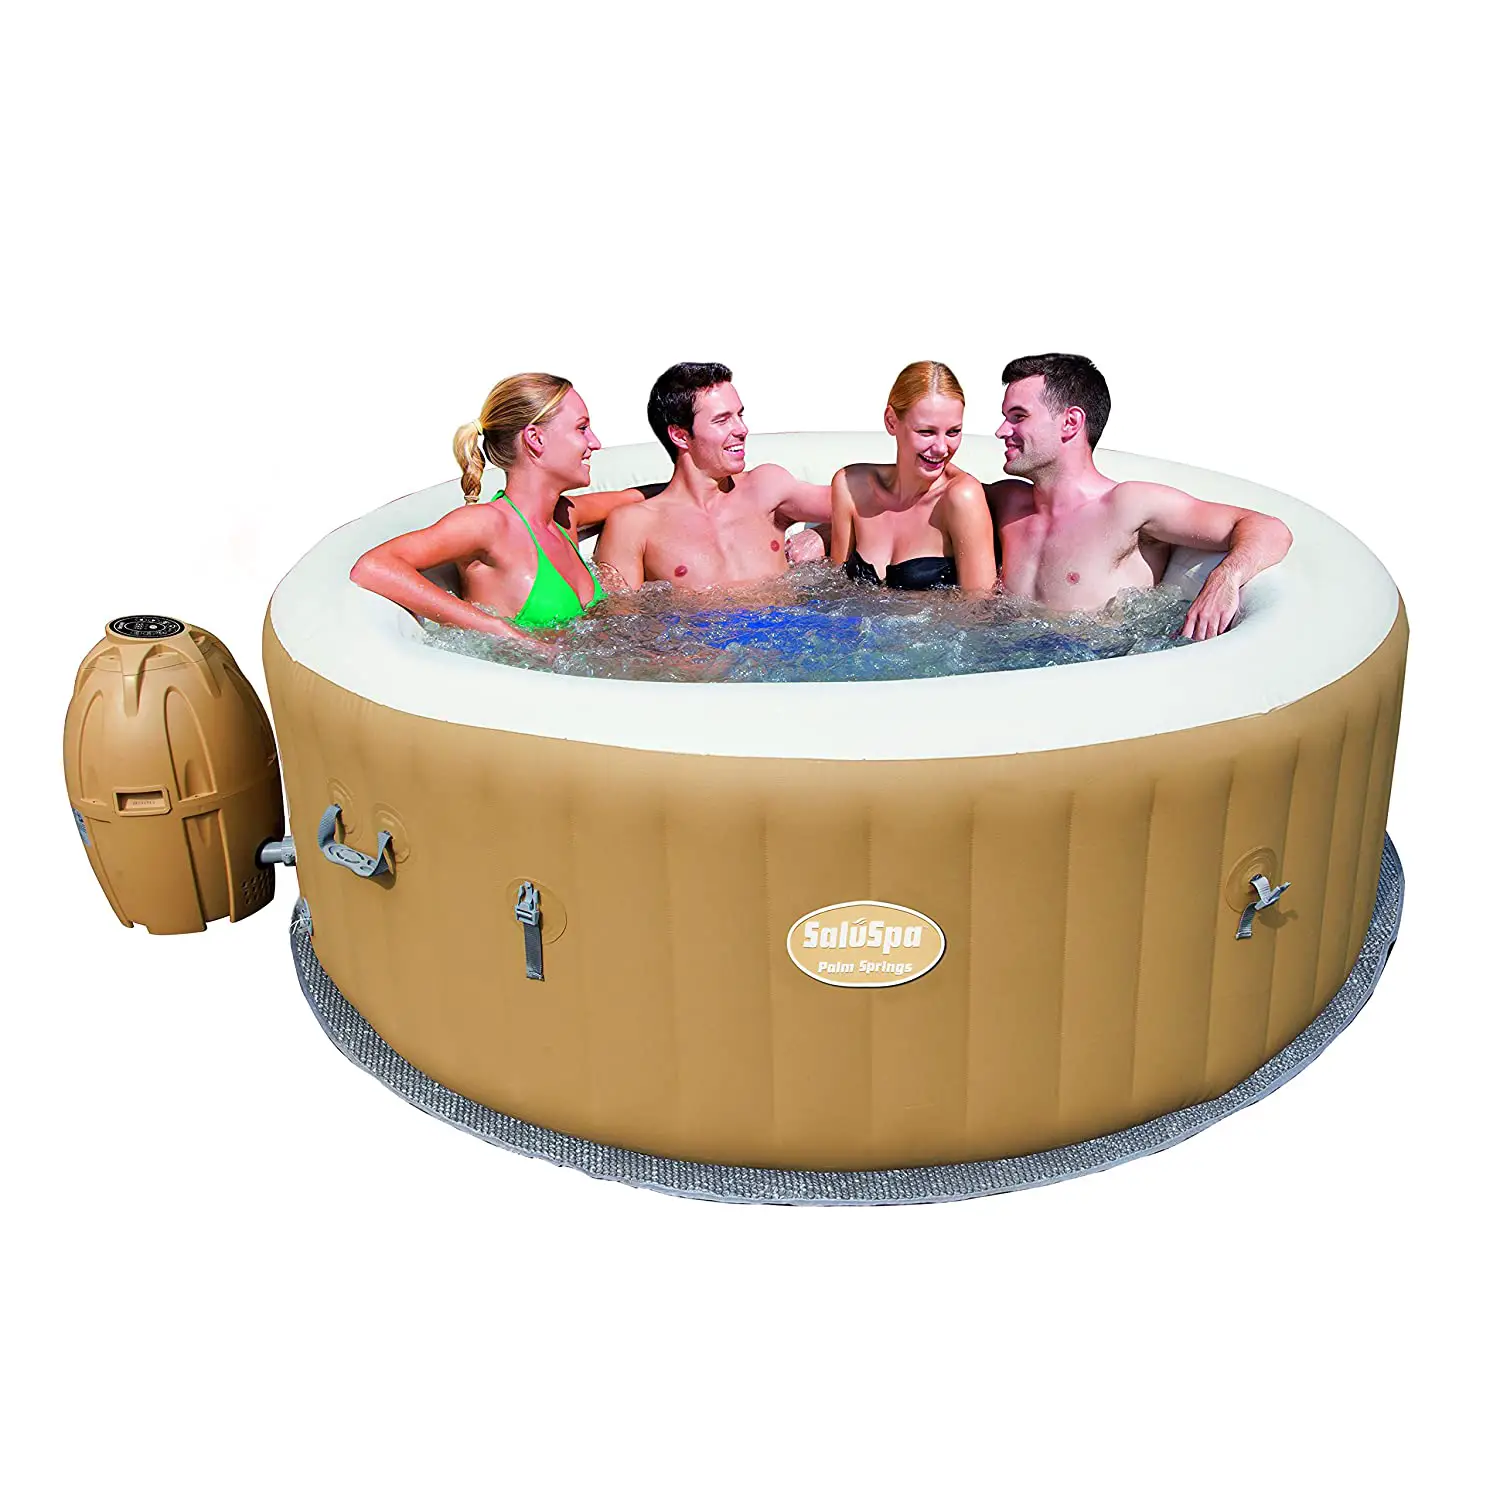 The 10 Best Salt Water Inflatable Hot Tub